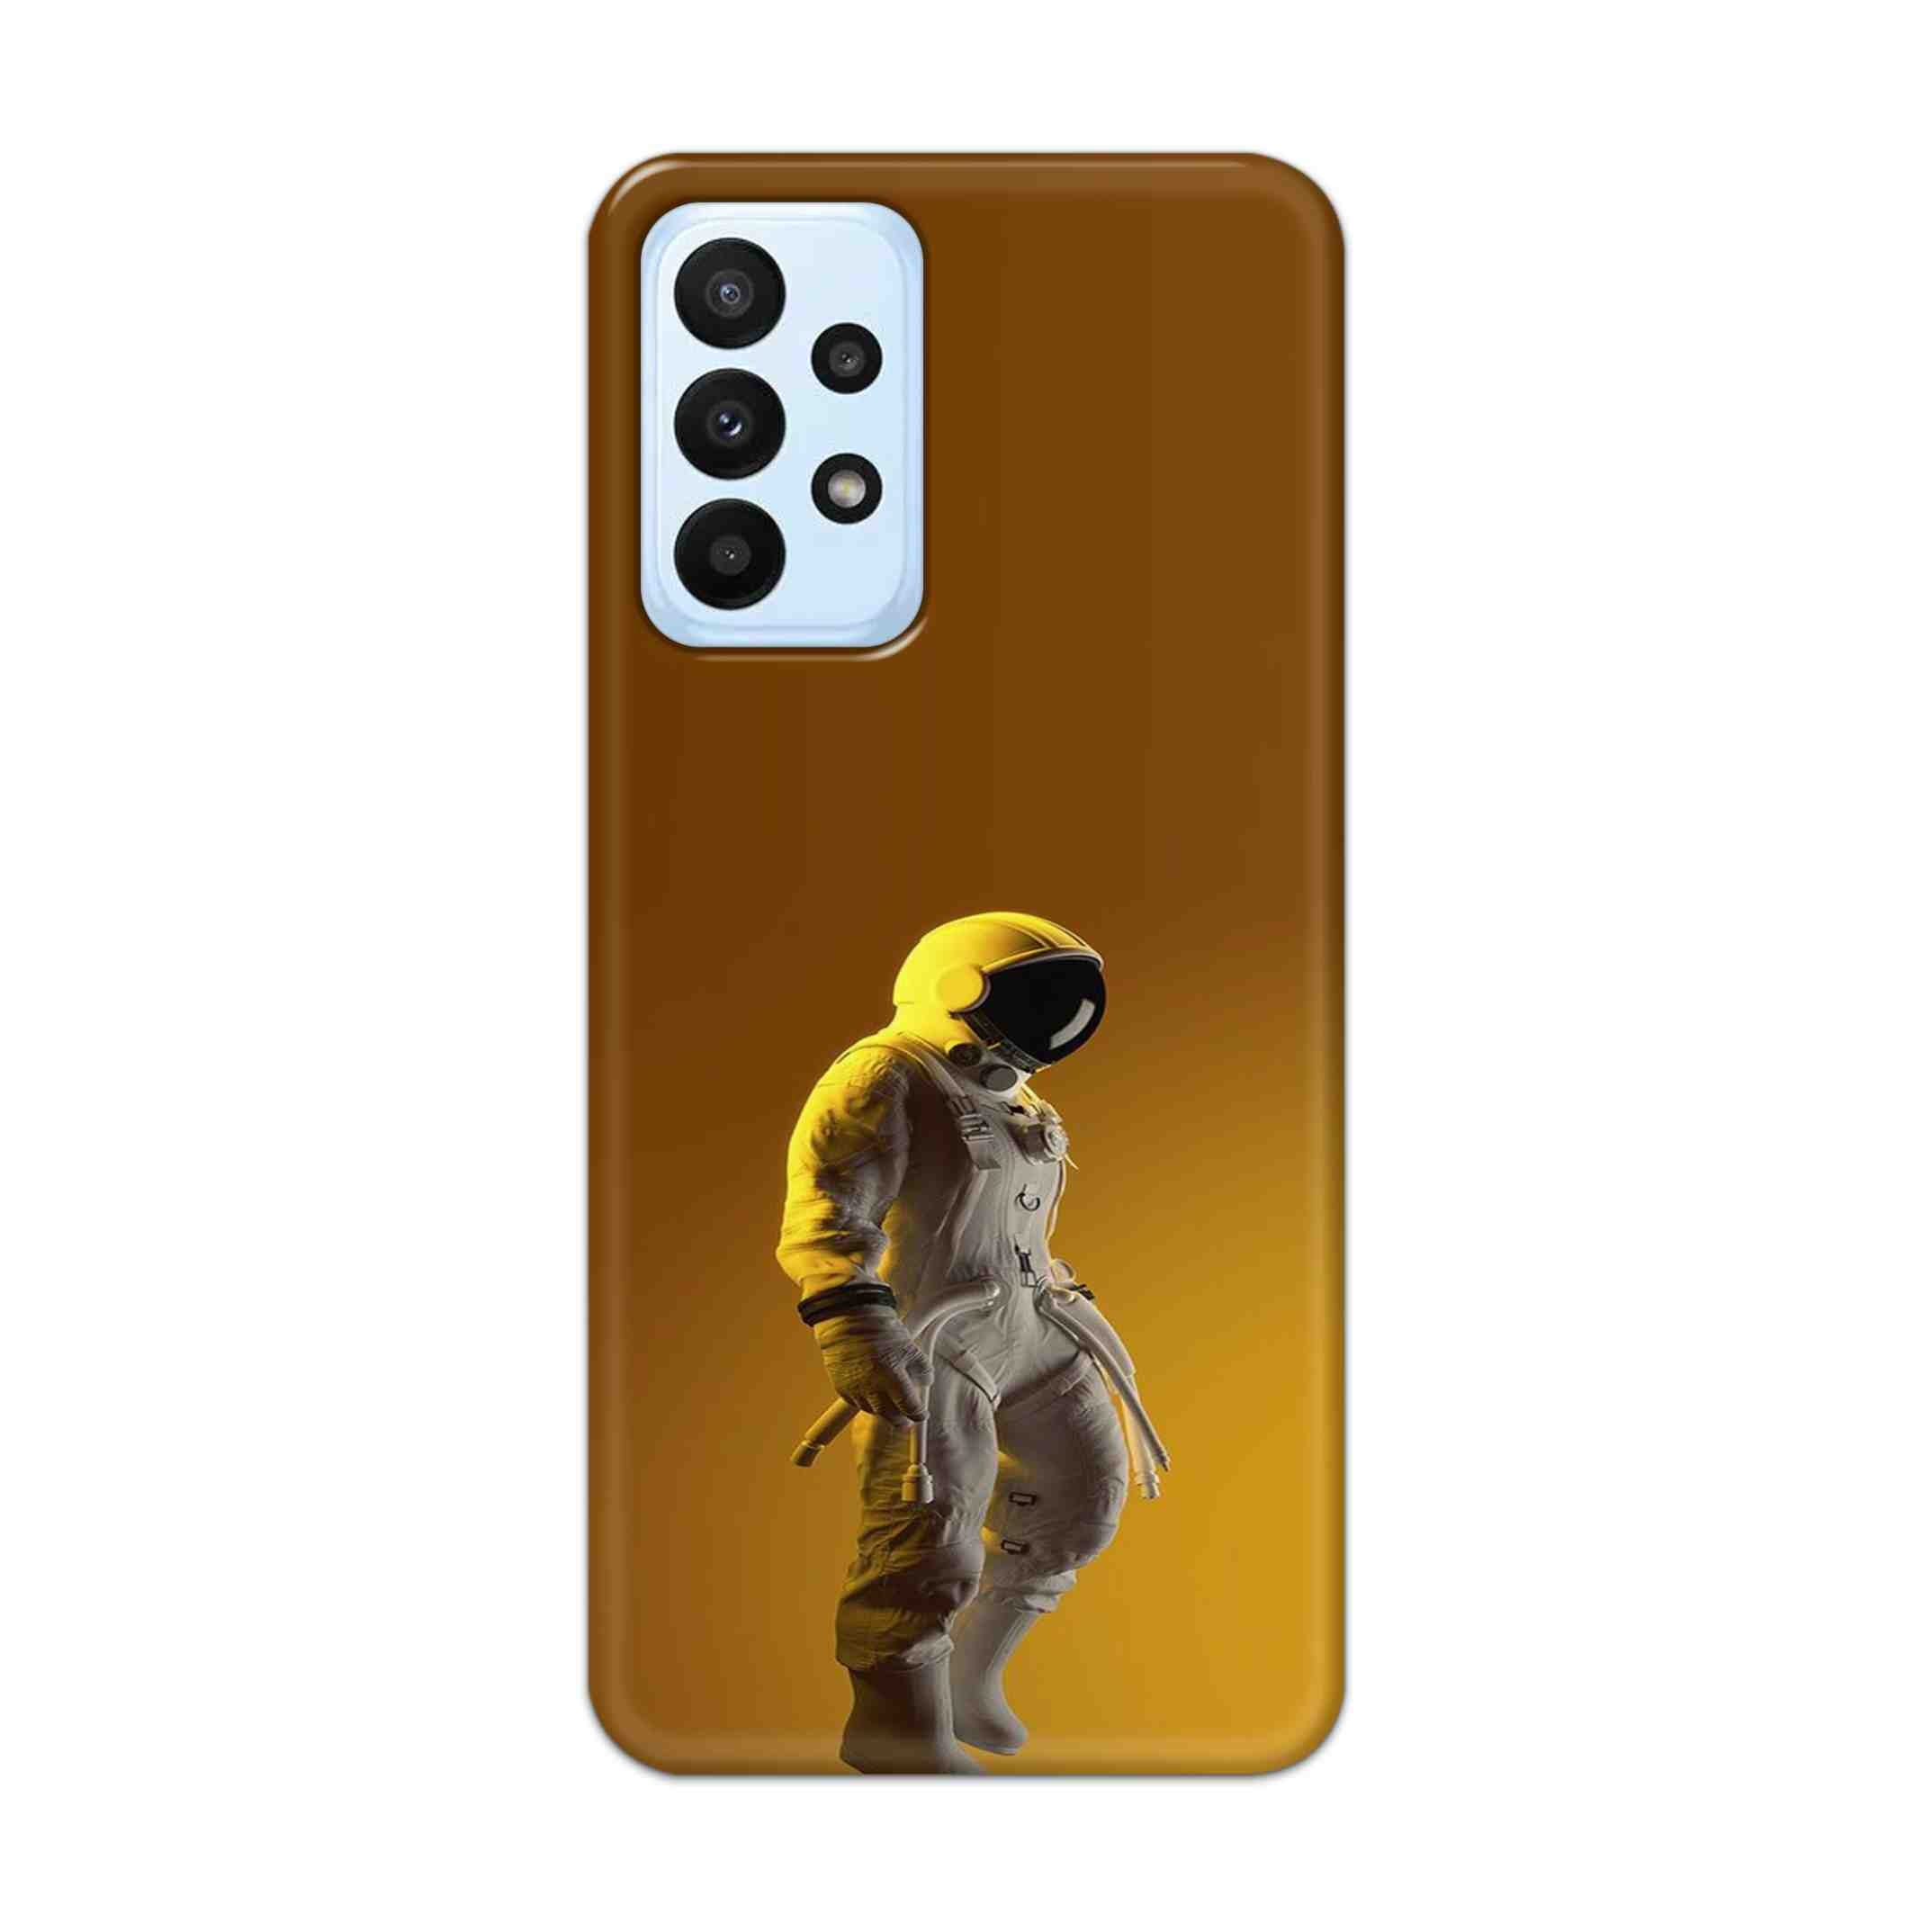 Buy Yellow Astronaut Hard Back Mobile Phone Case Cover For Samsung A23 Online